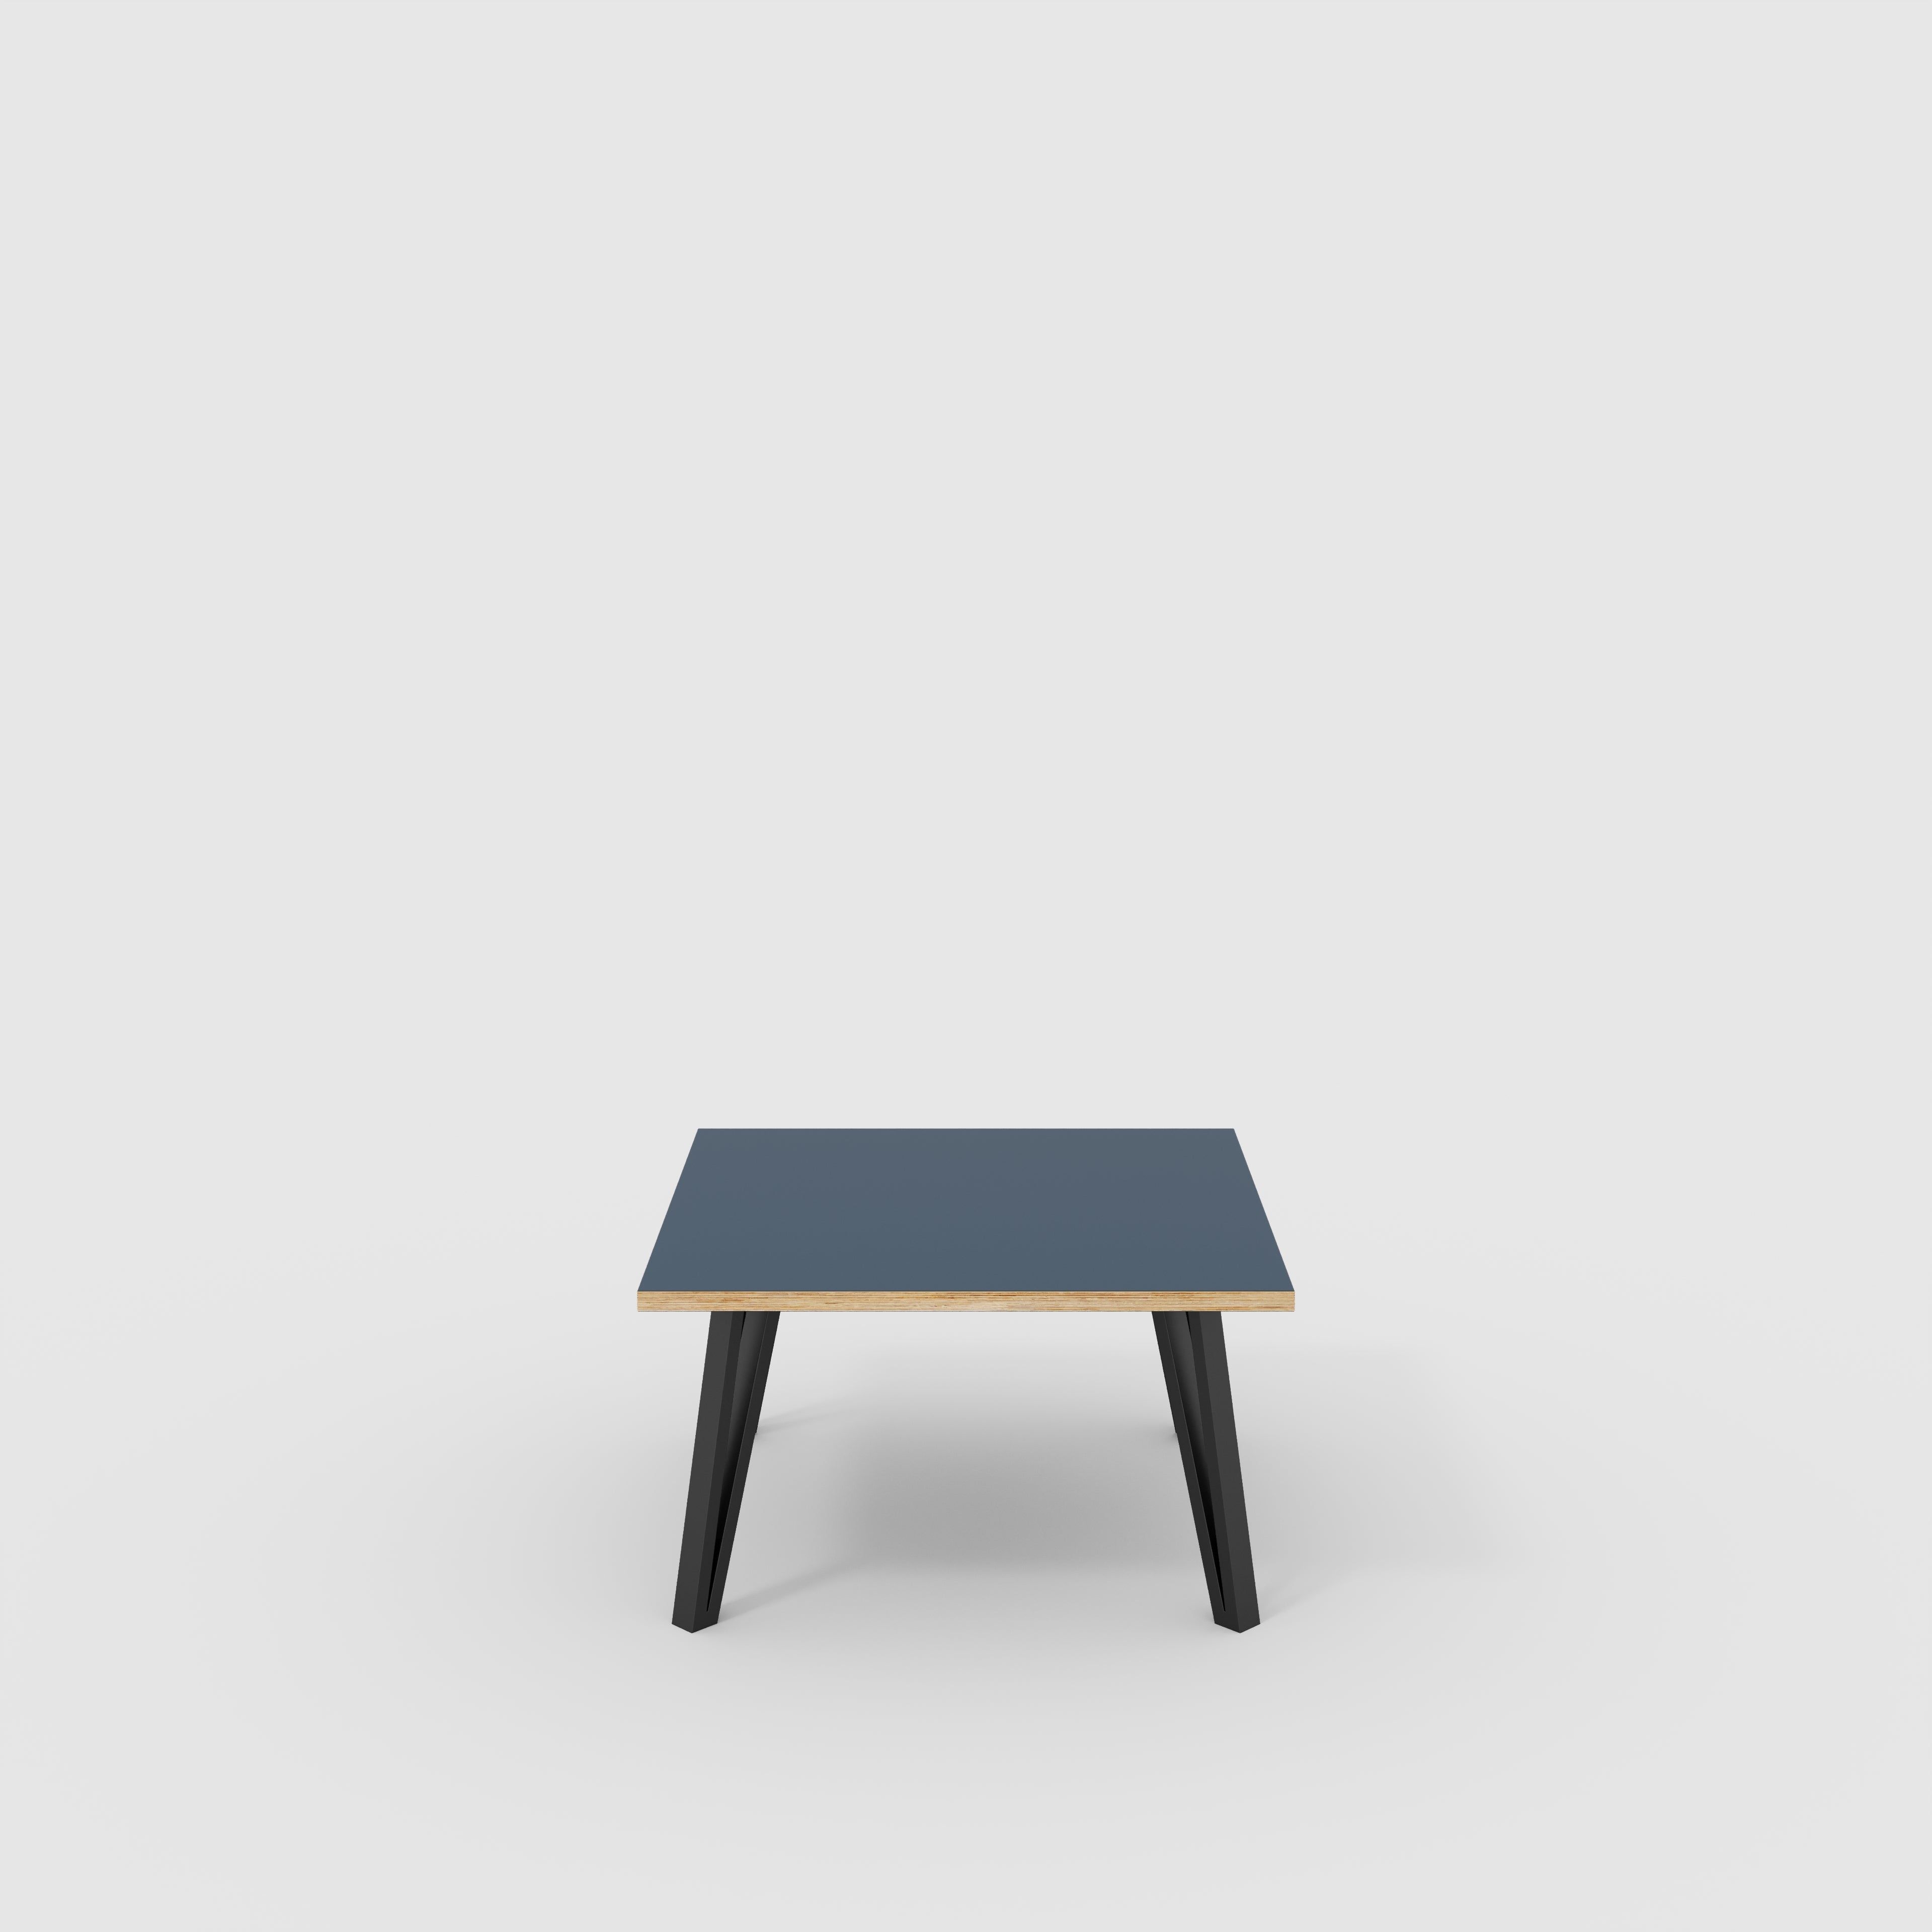 Coffee Table with Black Box Hairpin Legs - Formica Night Sea Blue - 800(w) x 800(d) x 425(h)